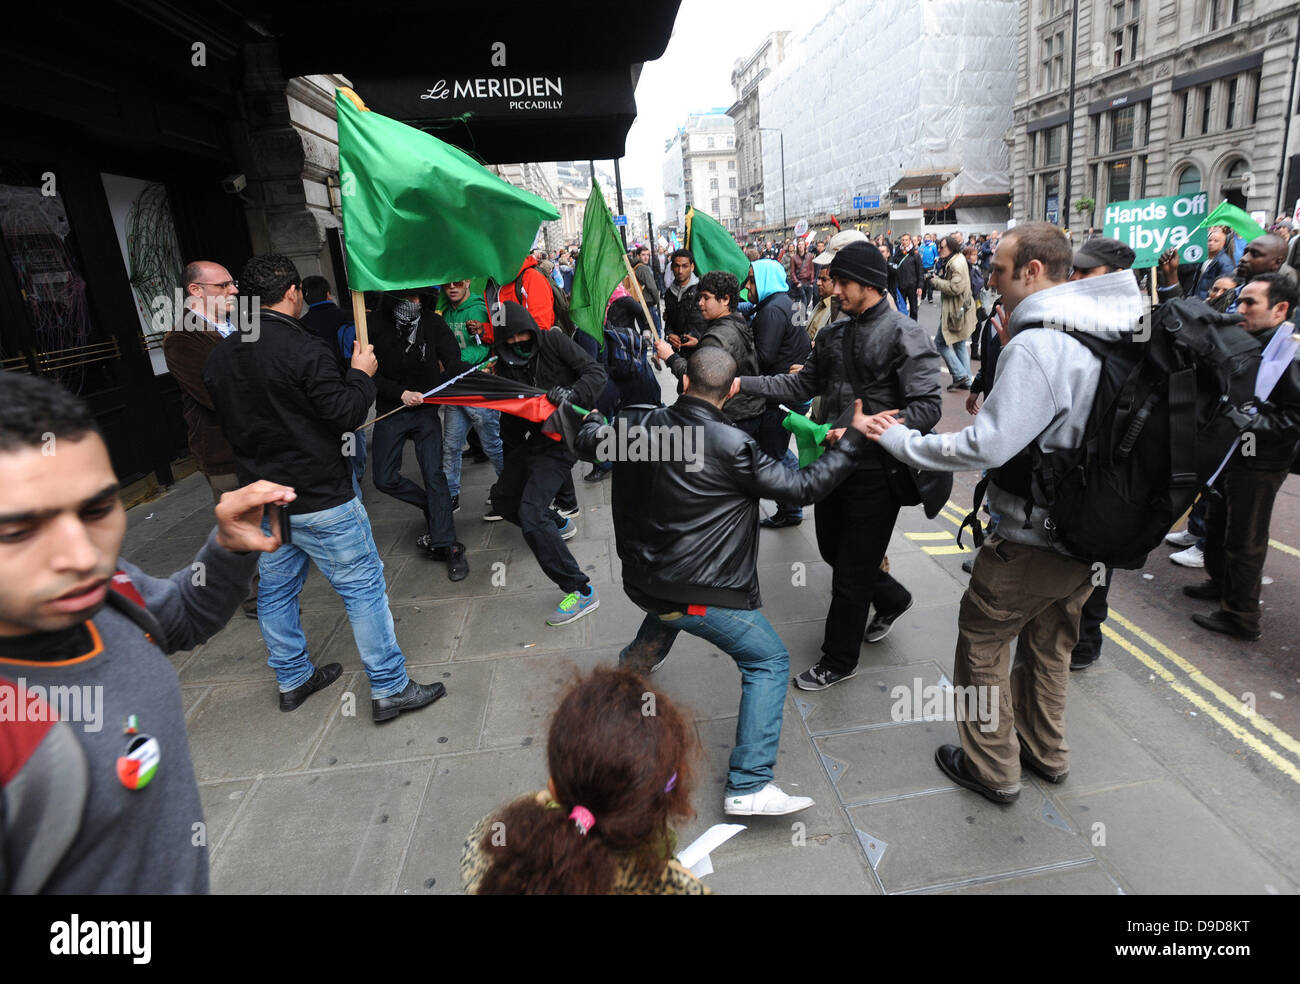 Libyan pro Gaddafi supporters violently attack a group of protesters carrying the flag of the Libyan rebels during the March for the Alternative - TUC demonstration in Central London. London, England - 26.03.11 Stock Photo